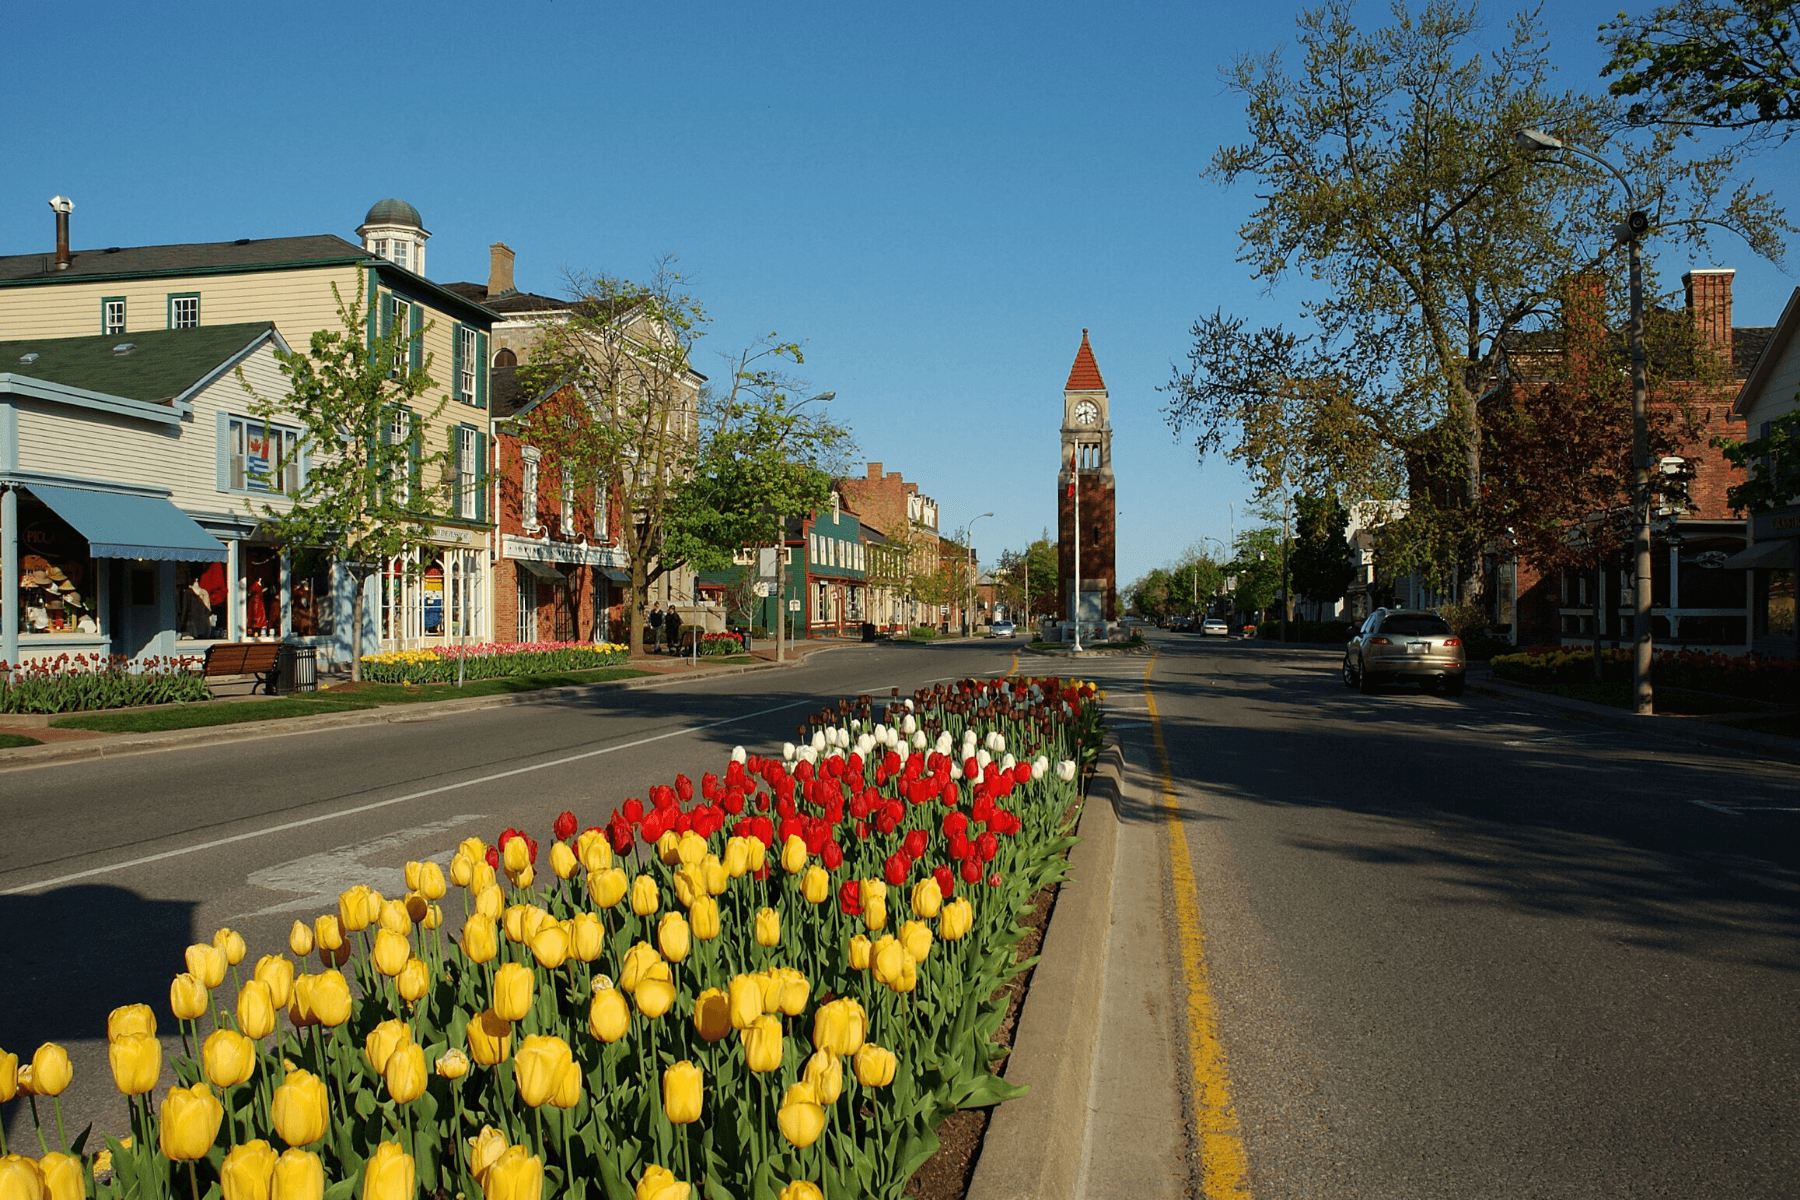 https://res.cloudinary.com/see-sight-tours/image/upload/v1581439794/Niagara-on-the-Lake.png